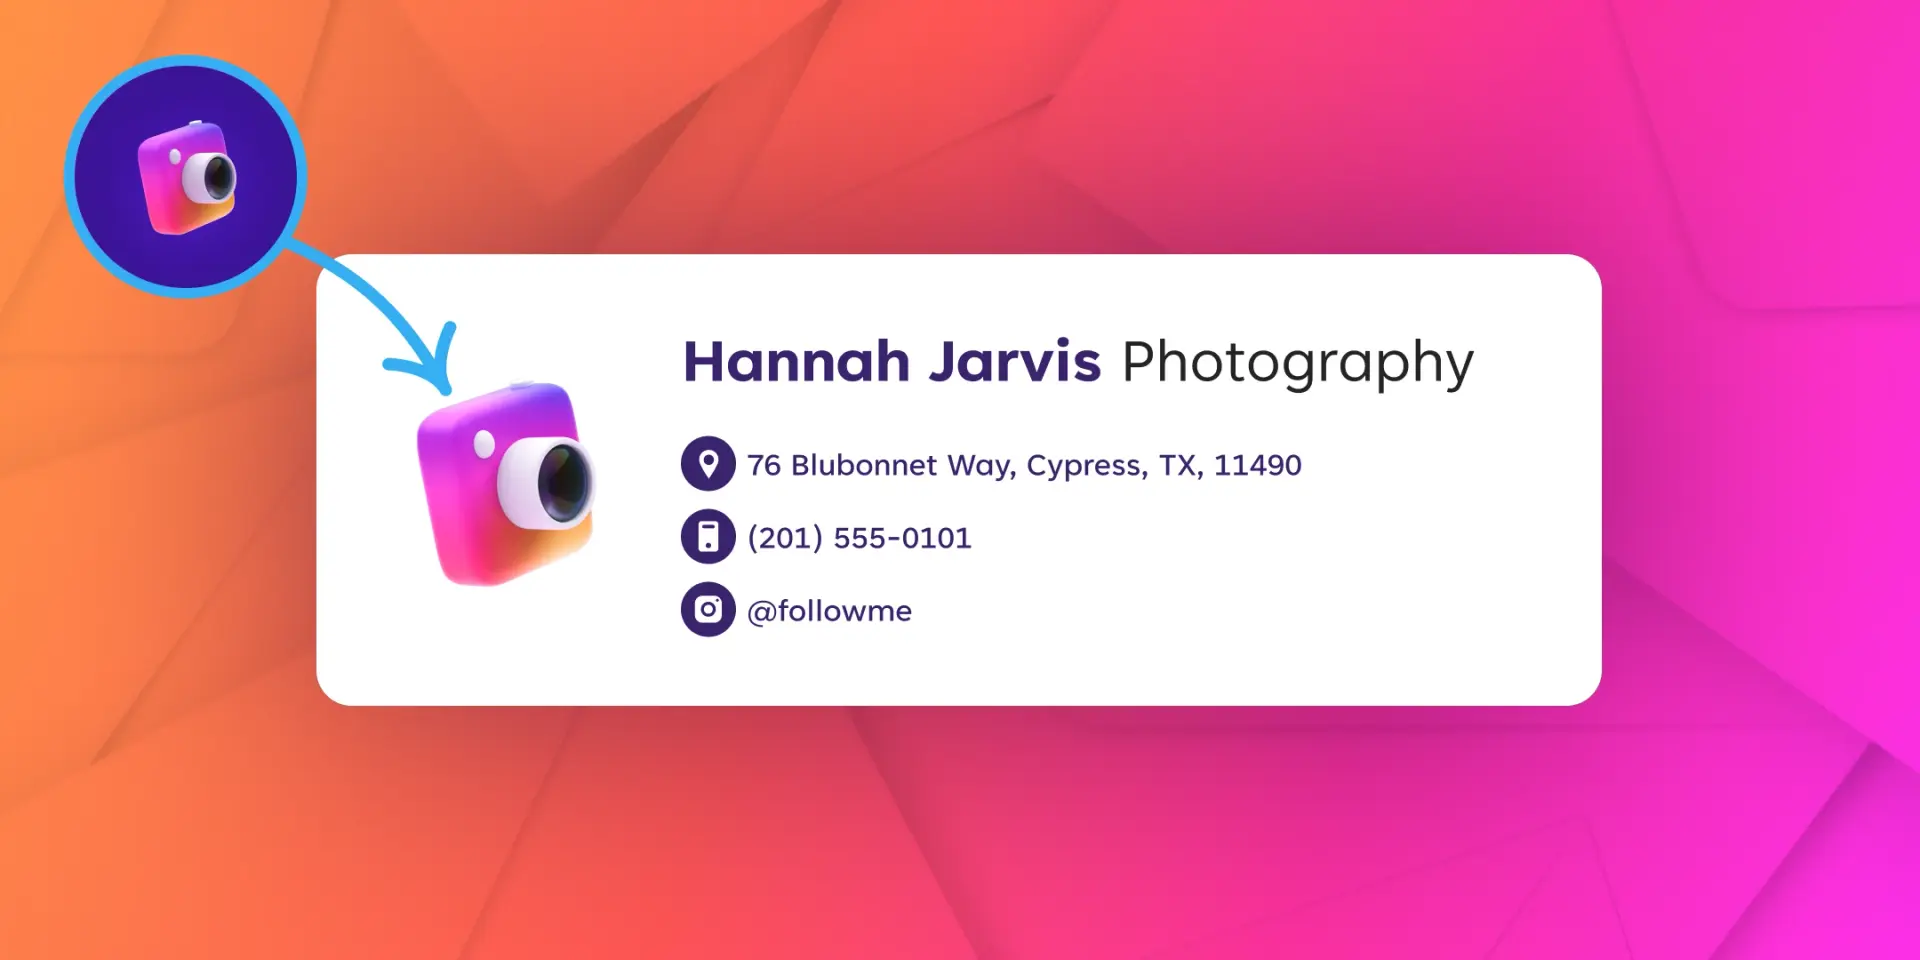 A visual of an email signature with contact details on a orange and pink background. 